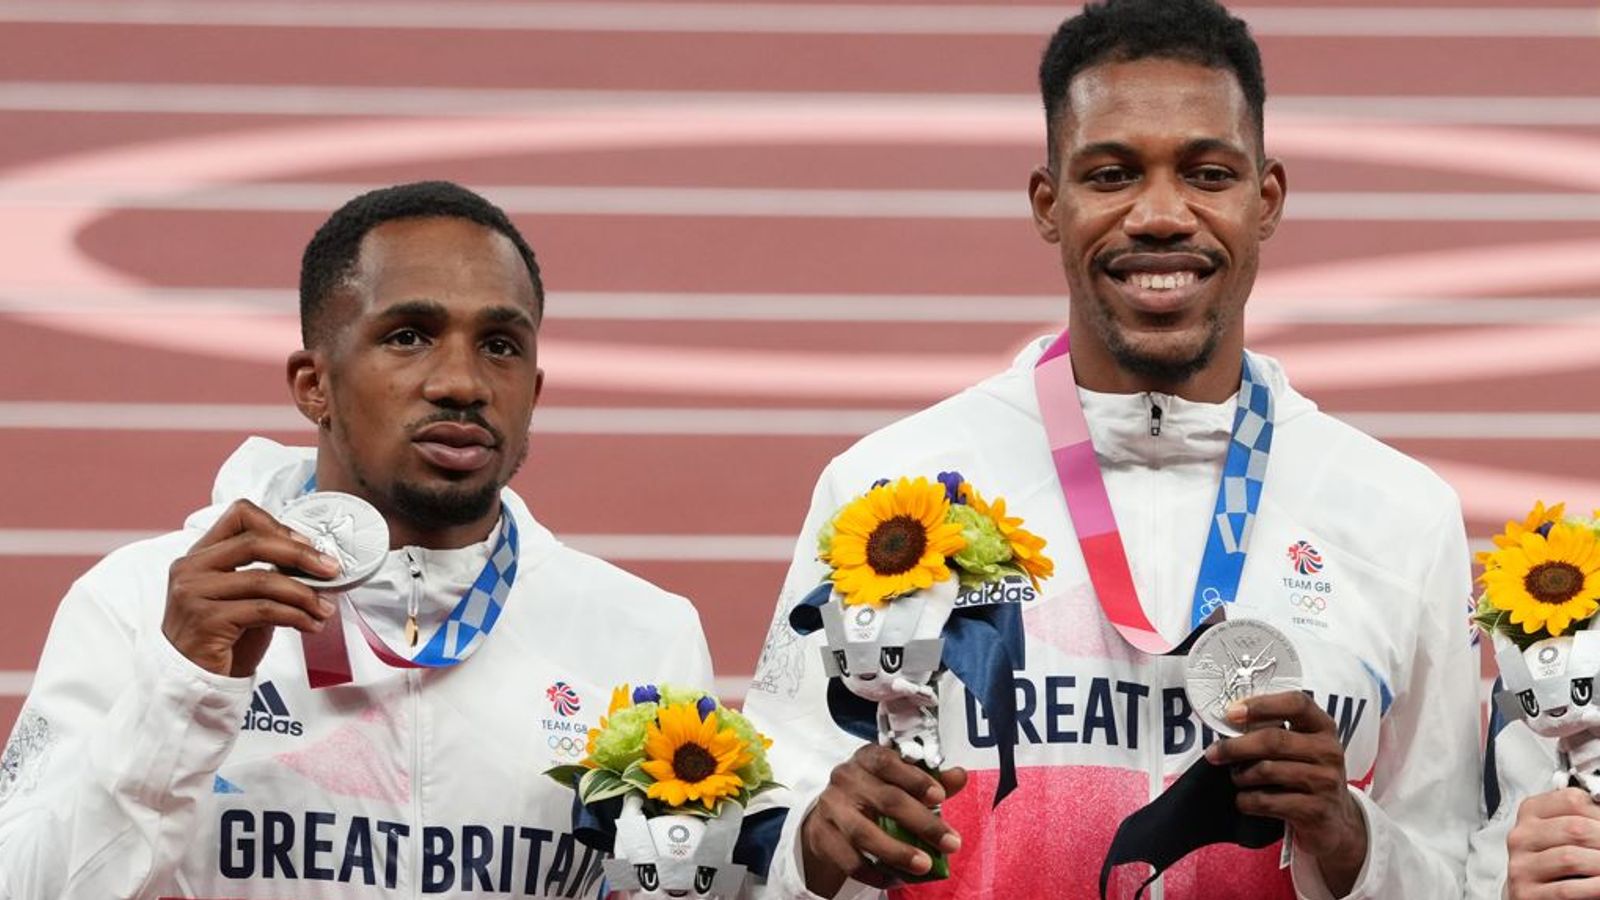 Zharnel Hughes forgives CJ Ujah for failed test that cost Great Britain Olympic relay silver